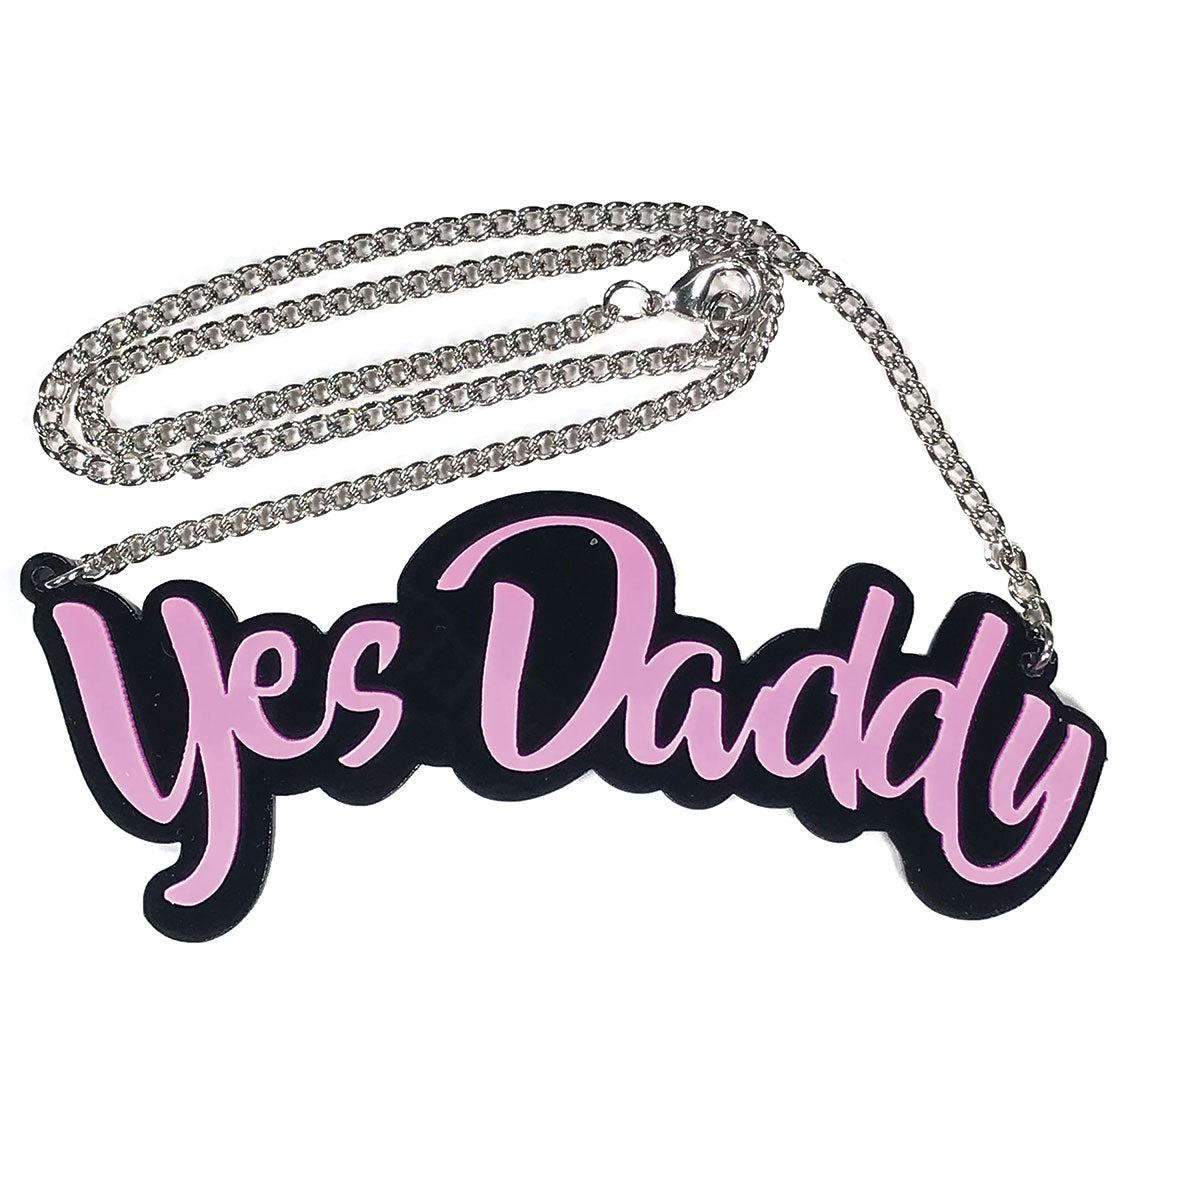 Geeky & Kinky Yes Daddy Necklace